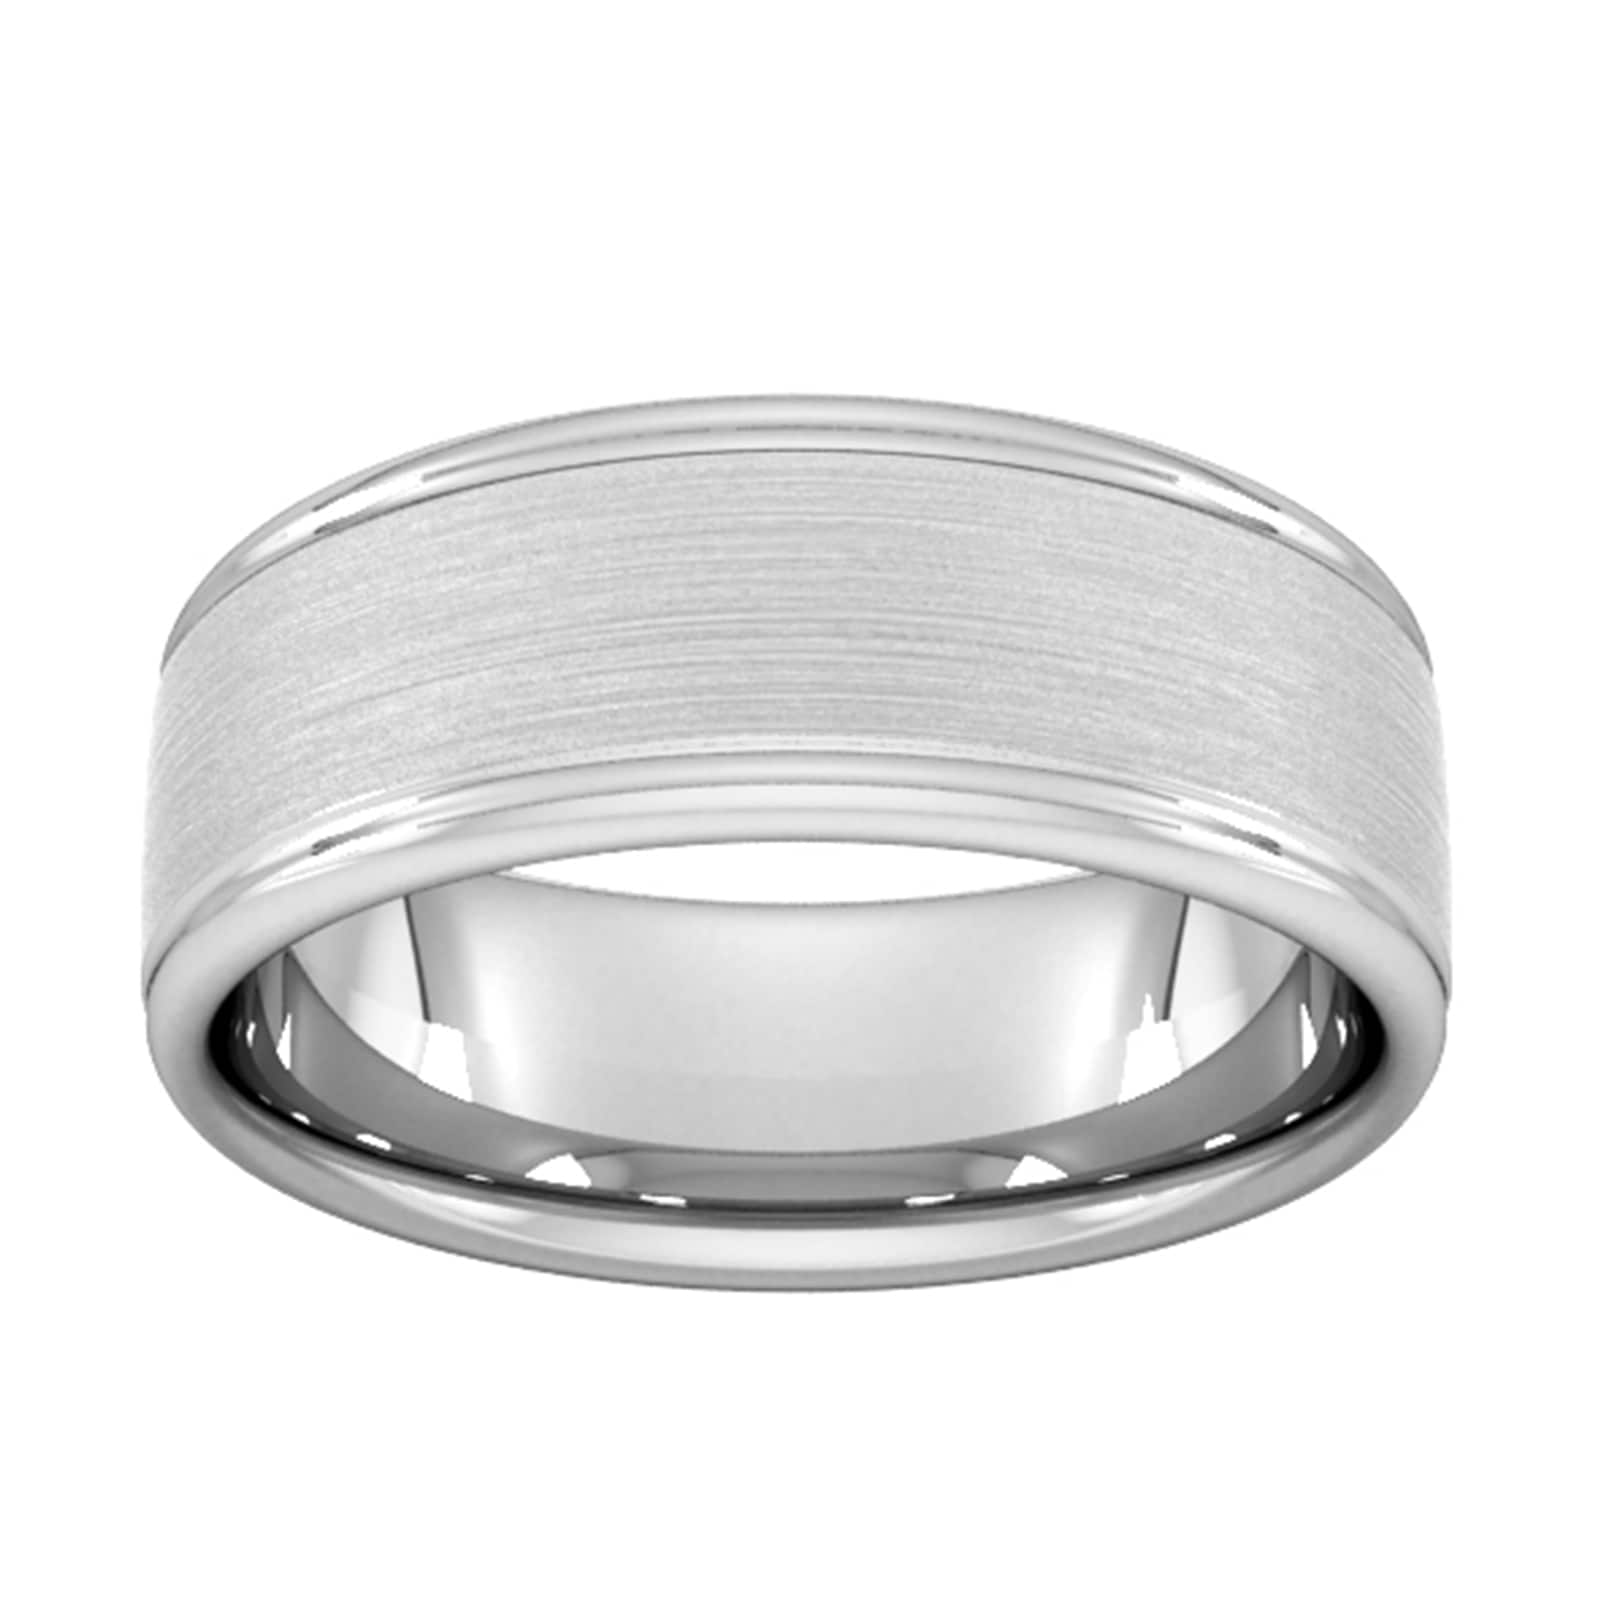 8mm Flat Court Heavy Matt Centre With Grooves Wedding Ring In 9 Carat White Gold - Ring Size J